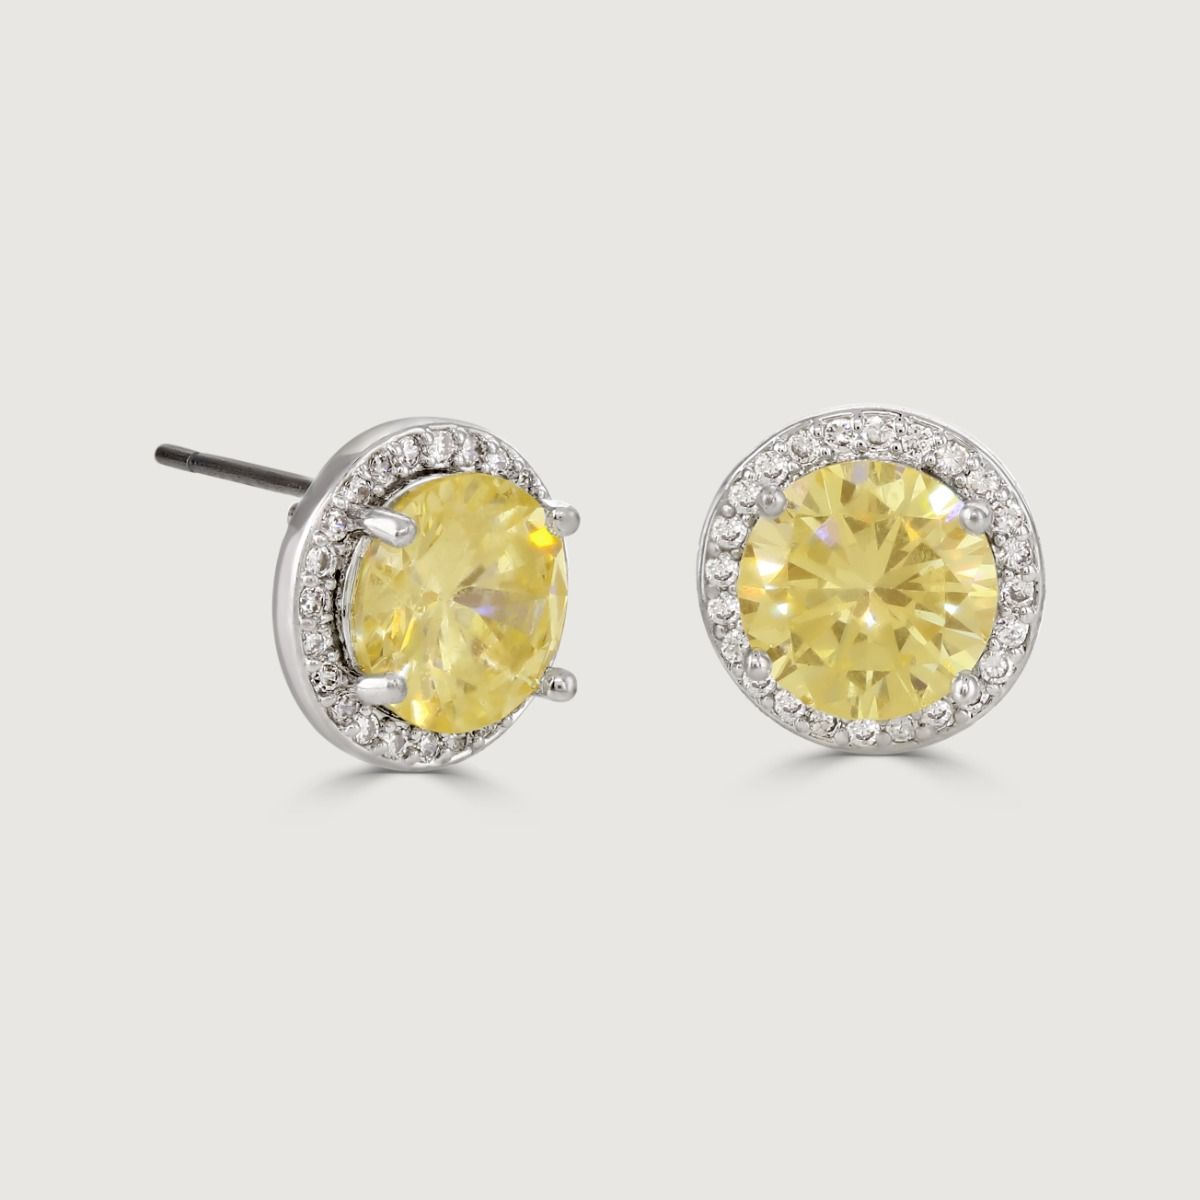 These dazzling stud earrings are set with a halo of flawlessly cut cubic zirconia stones, surrounding a dazzling round canary centre stone. 